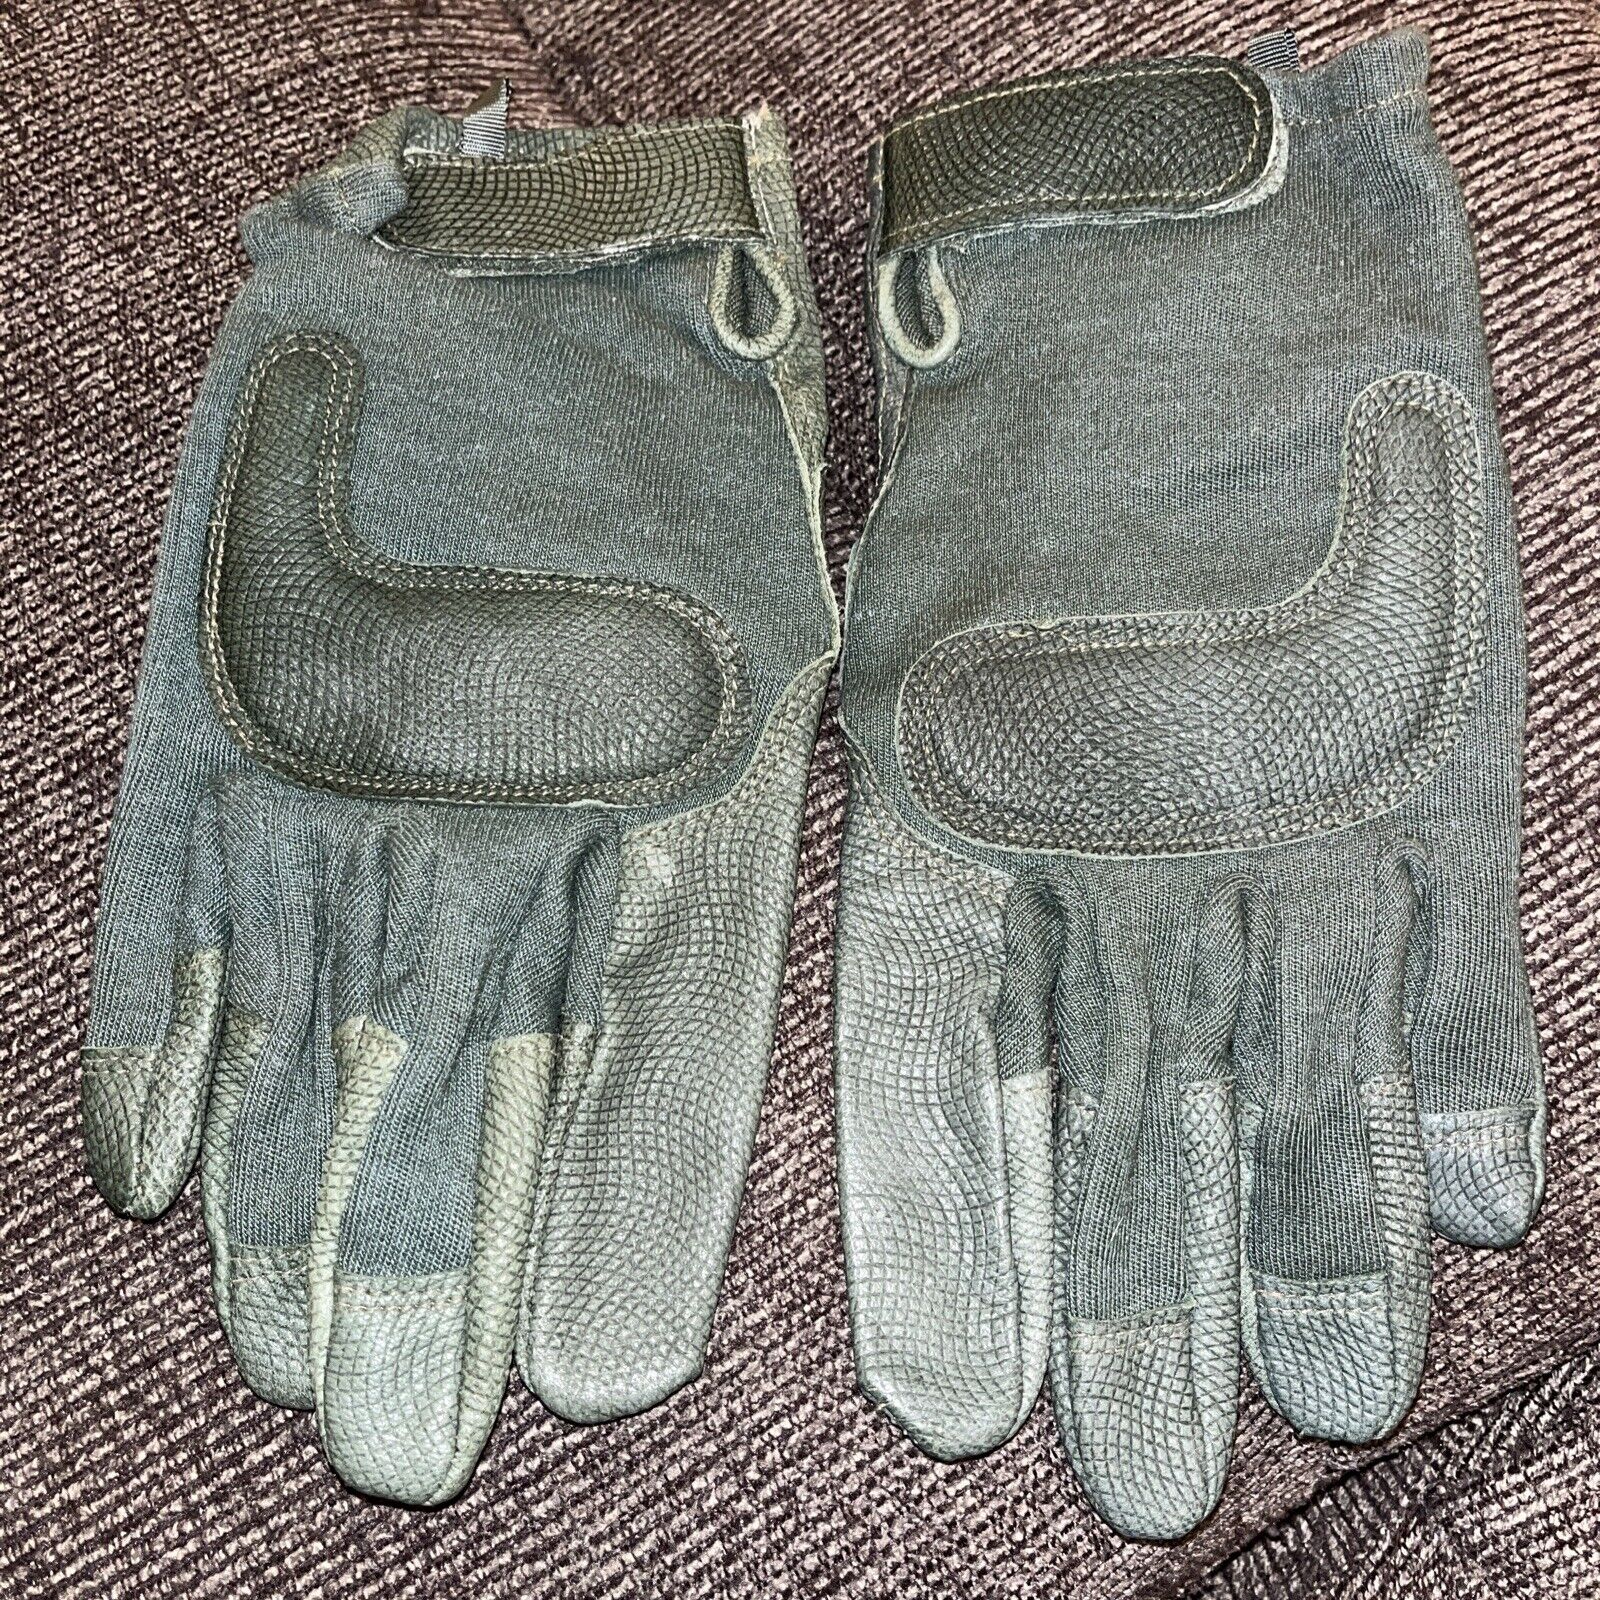 LARGE HWI Gear Army Combat Gloves MCN 8415-01-F008248 excellent shape